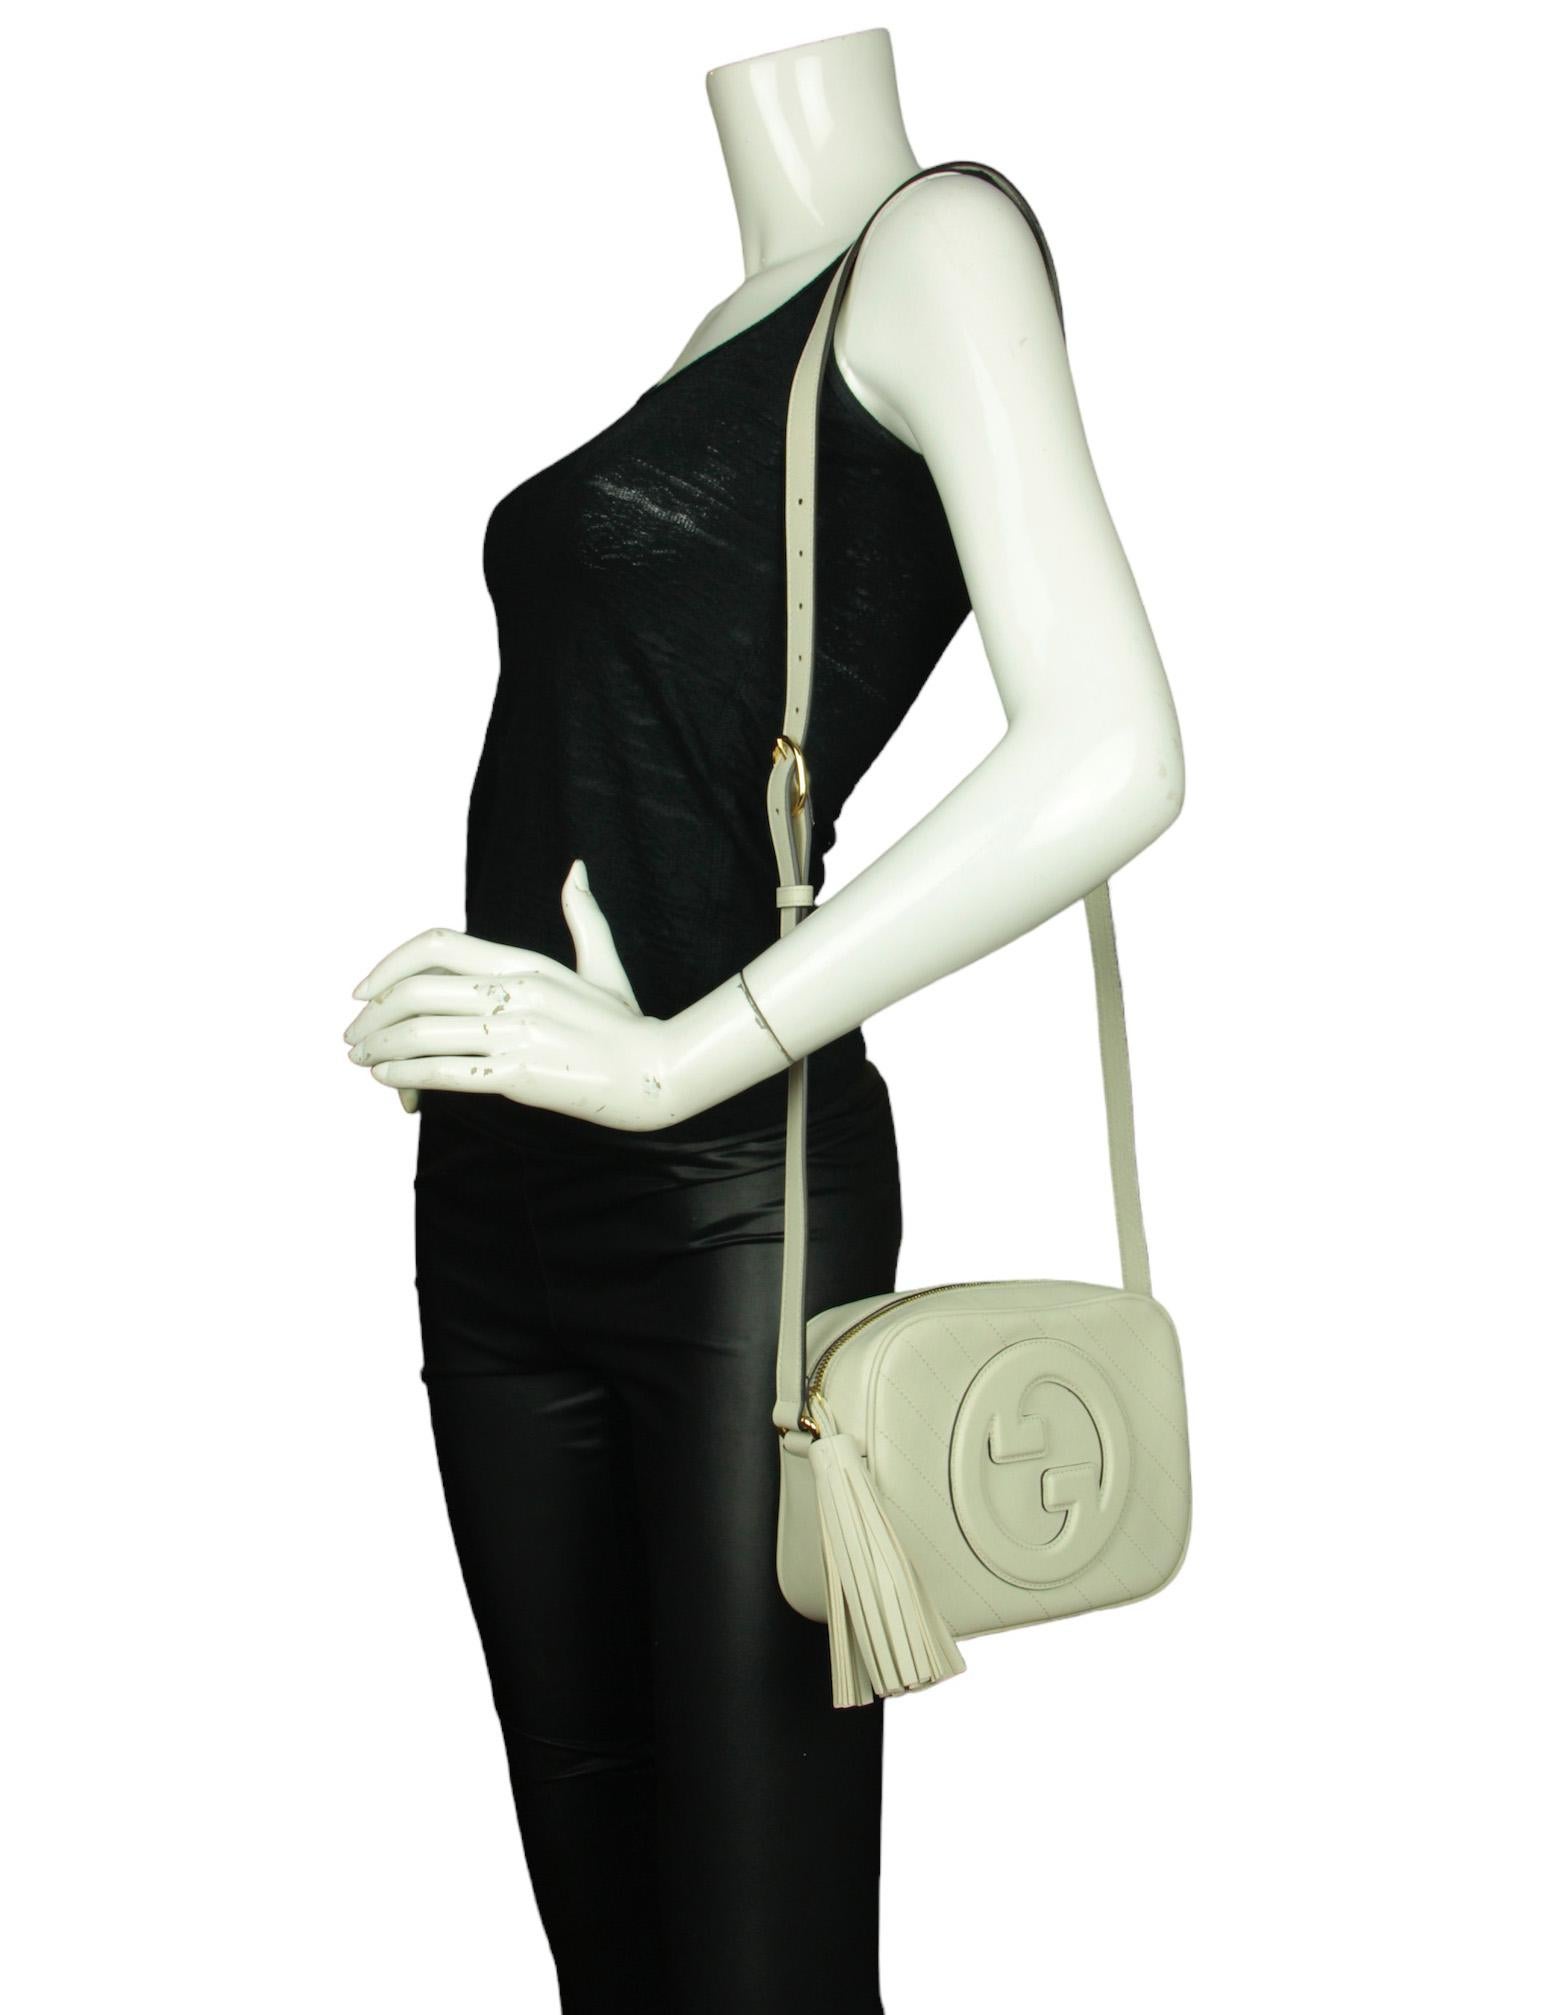 Gucci White Leather Small Blondie Crossbody Bag

Made In: Italy
Color: White
Hardware: Goldtone
Materials: leather
Lining: Cotton linen
Closure/Opening: Zip top
Exterior Pockets: None
Interior Pockets: One flat
Exterior Condition: New
Interior